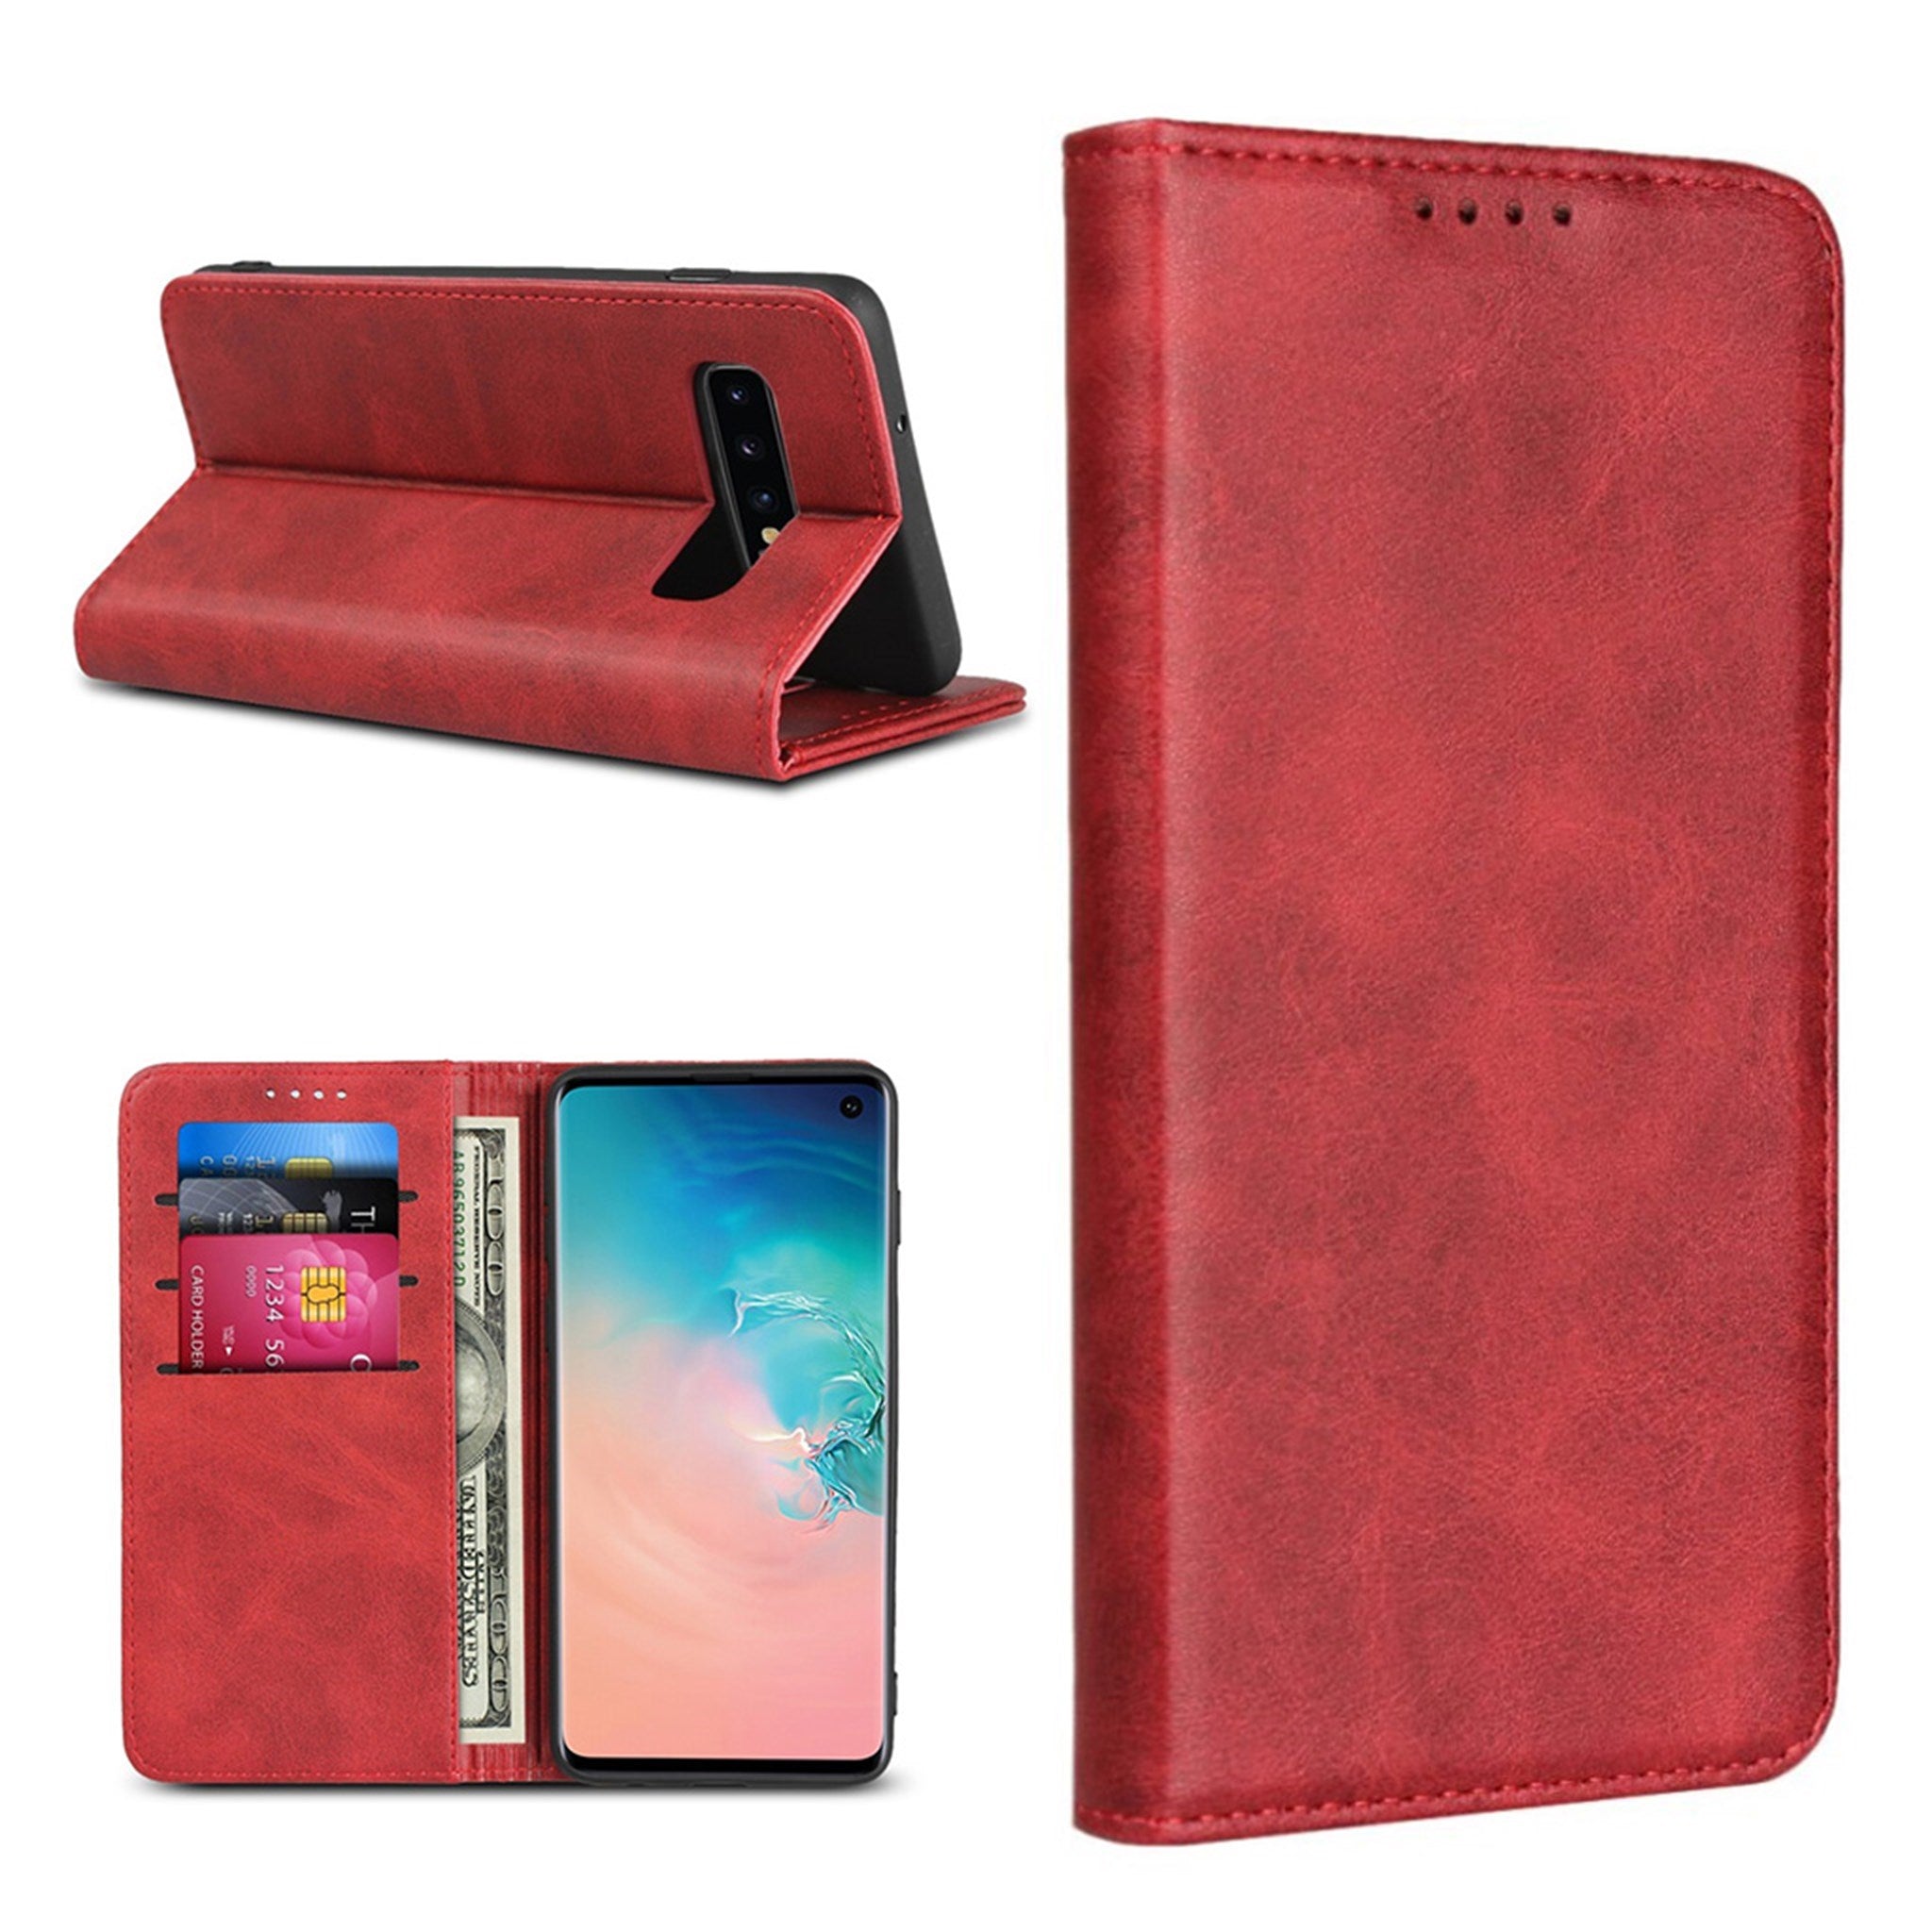 Samsung Galaxy S10 auto-absorbed leather case - Red